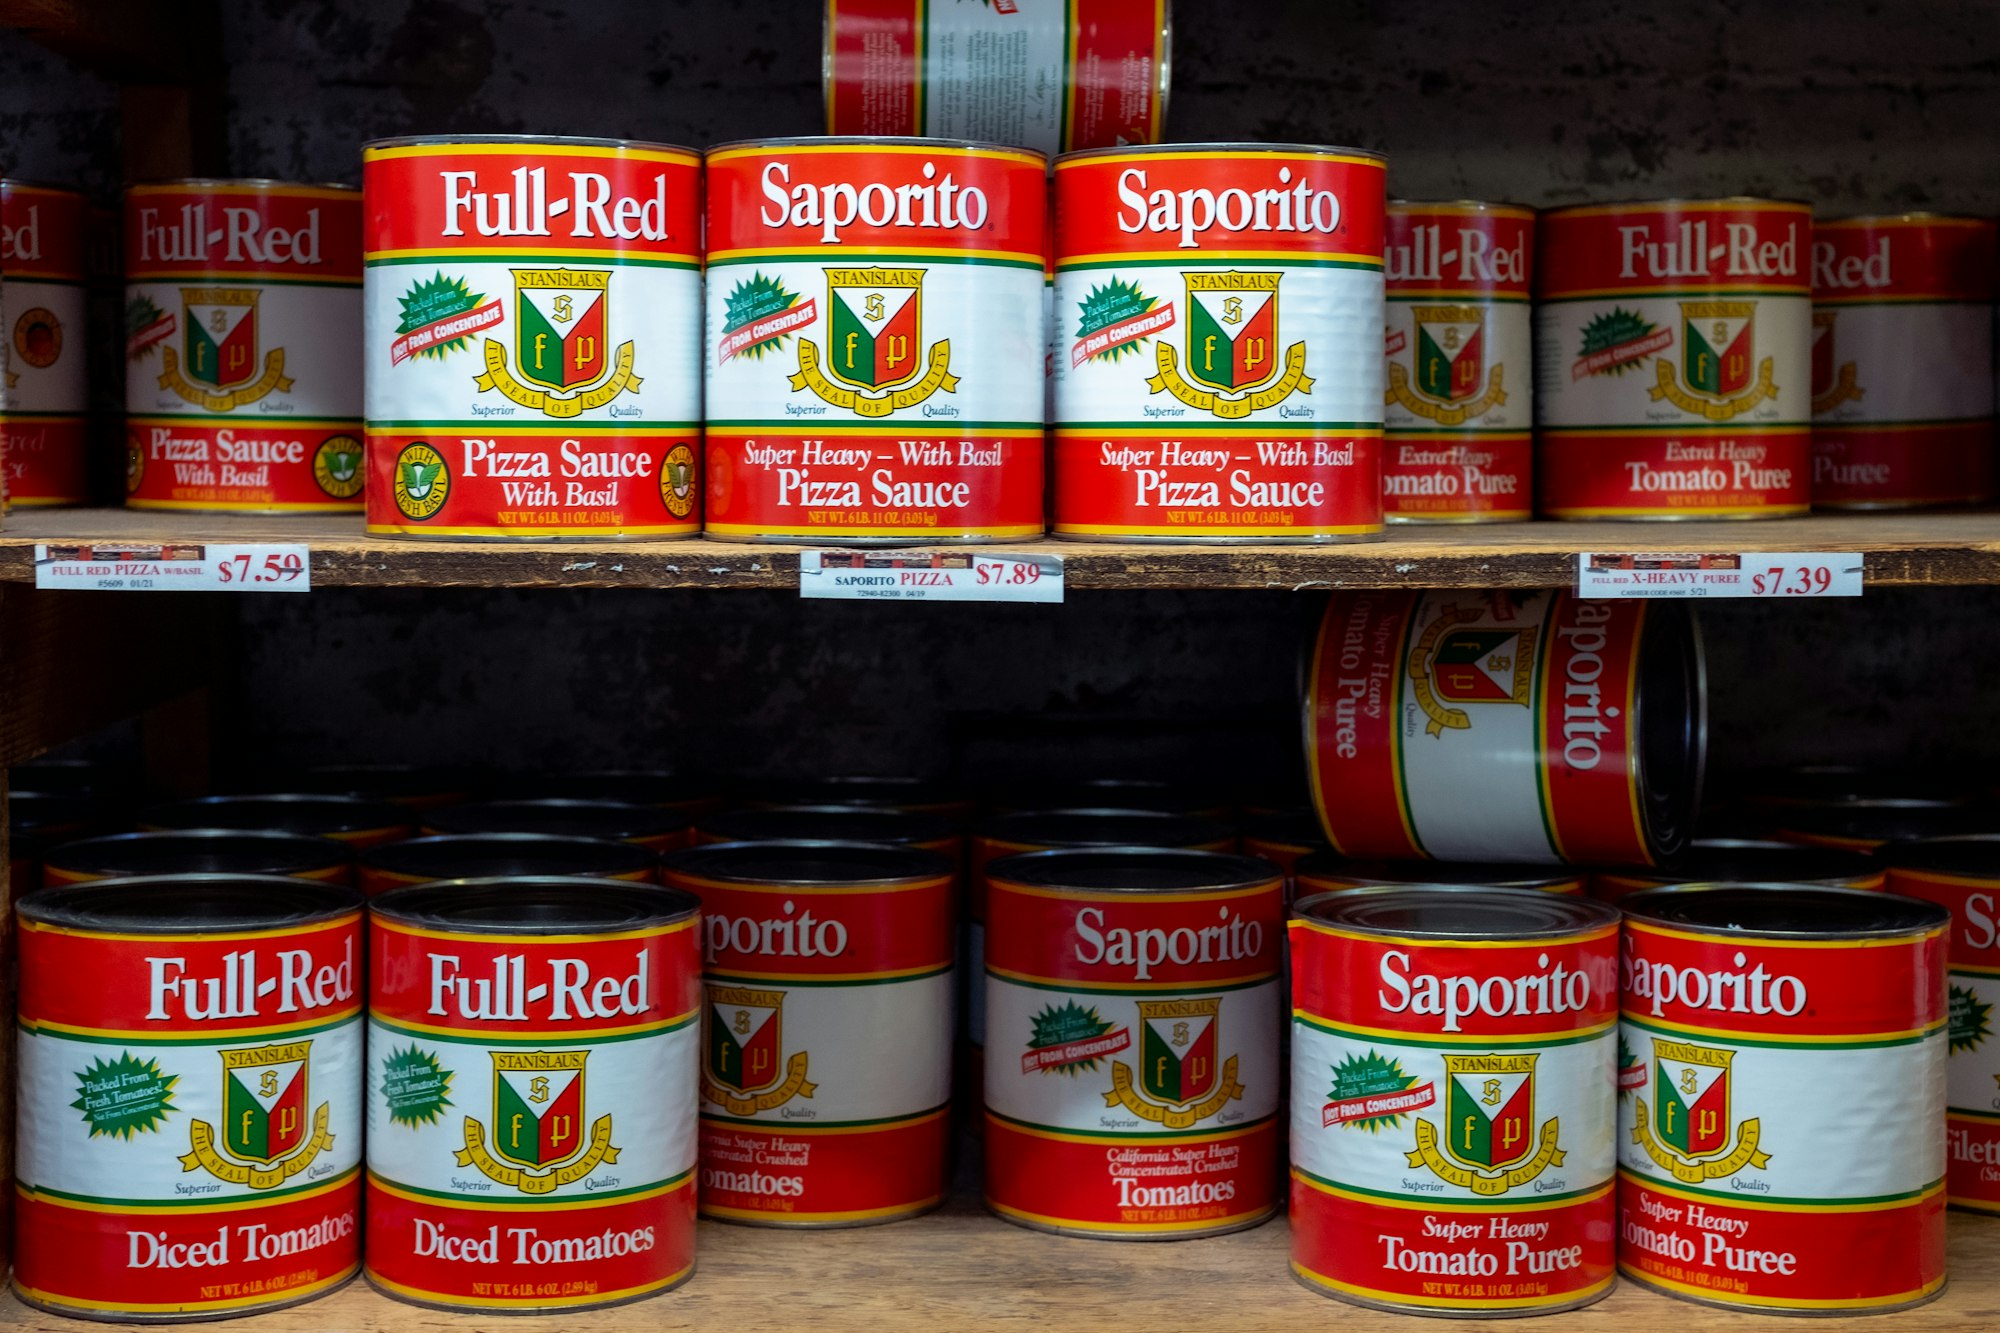 A store shelf with a variety of tomato-based cans, including tomato purée and pizza sauce